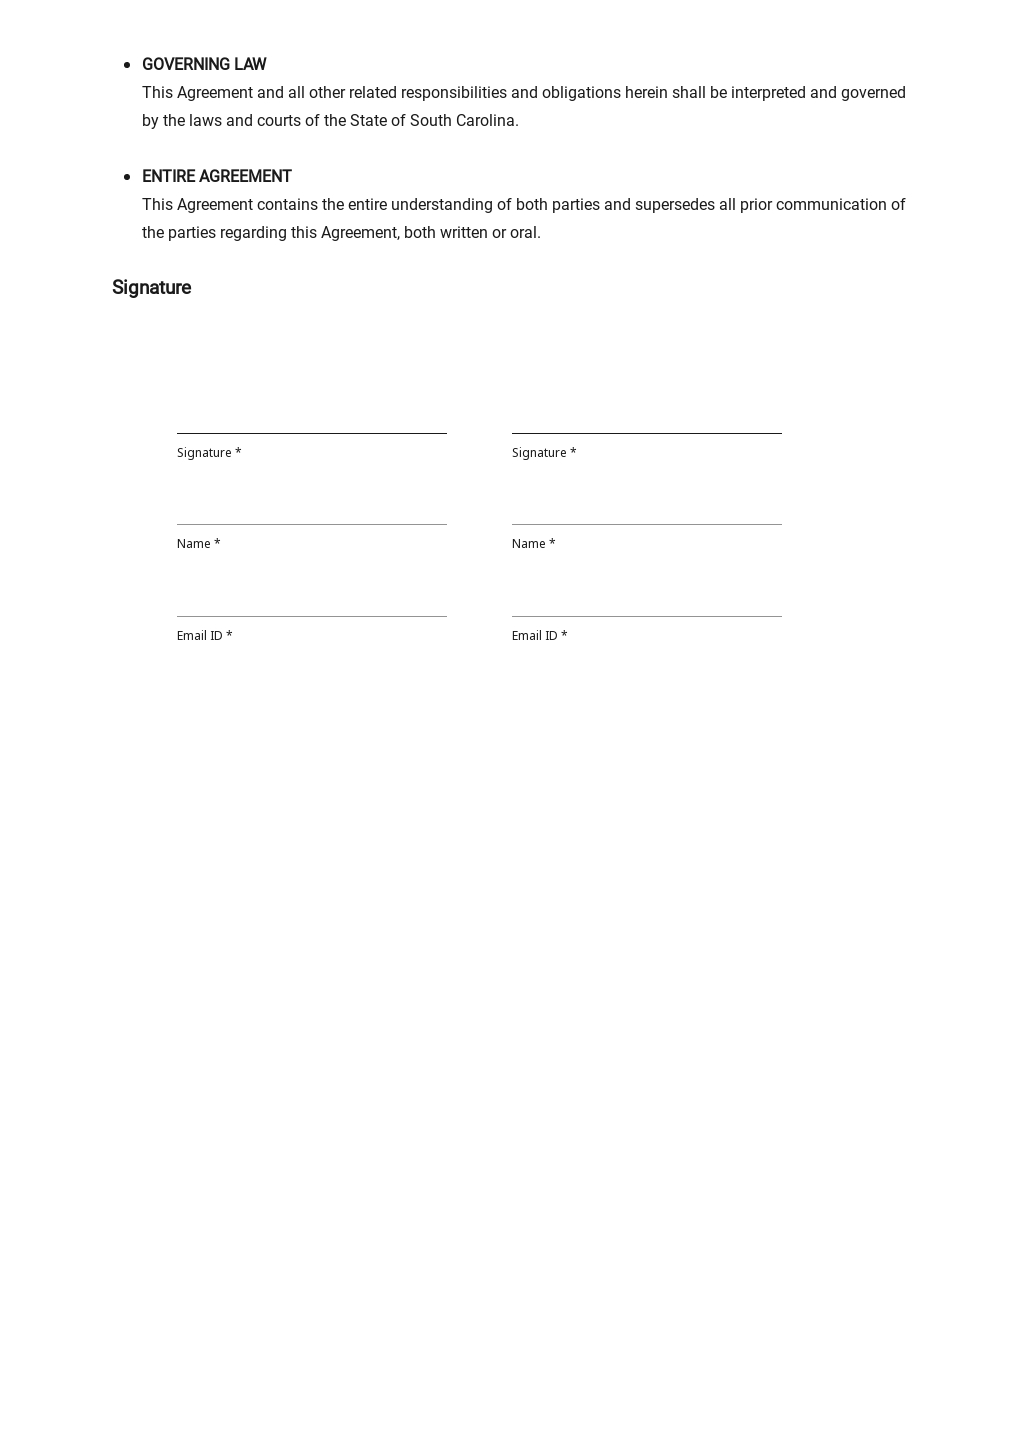 Subscription Form and Power of Attorney Template 3.jpe